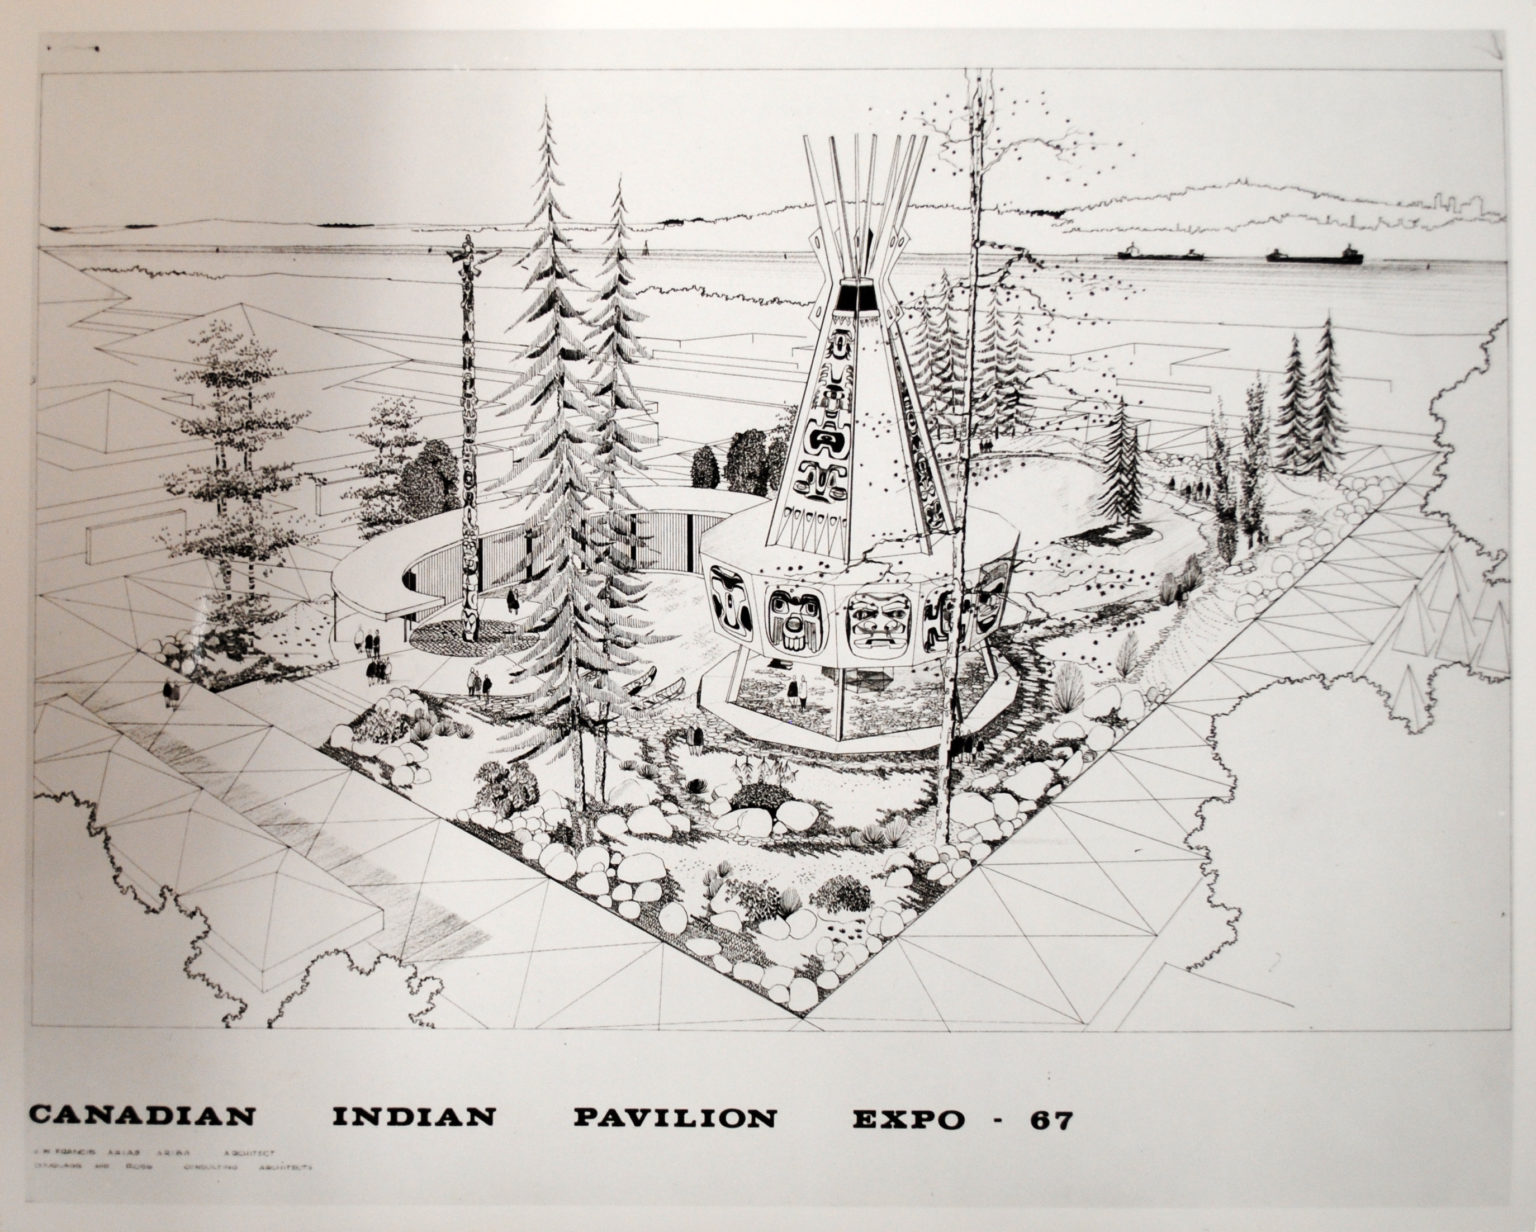 A black-and-white perspective drawing of an early design concept for the Indians of Canada Pavilion at Expo 67. A curved ramp leads up to a faceted cylinder, on which a tipi-like structure sits. The tipi and cylinder are covered in generic artwork. A totem pole stands near the entrance to the ramp, and the building is surrounded by trees of different types. Small figures stand near the entrance. The title block beneath the drawing reads “Canadian Indian Pavilion Expo – 67” in capital letters. Below, much smaller capitalized text reads “J.W. Francis, A.R.I.A.S., A.R.I.B.A.” and “Douglass and Ross, Consulting Architects.”